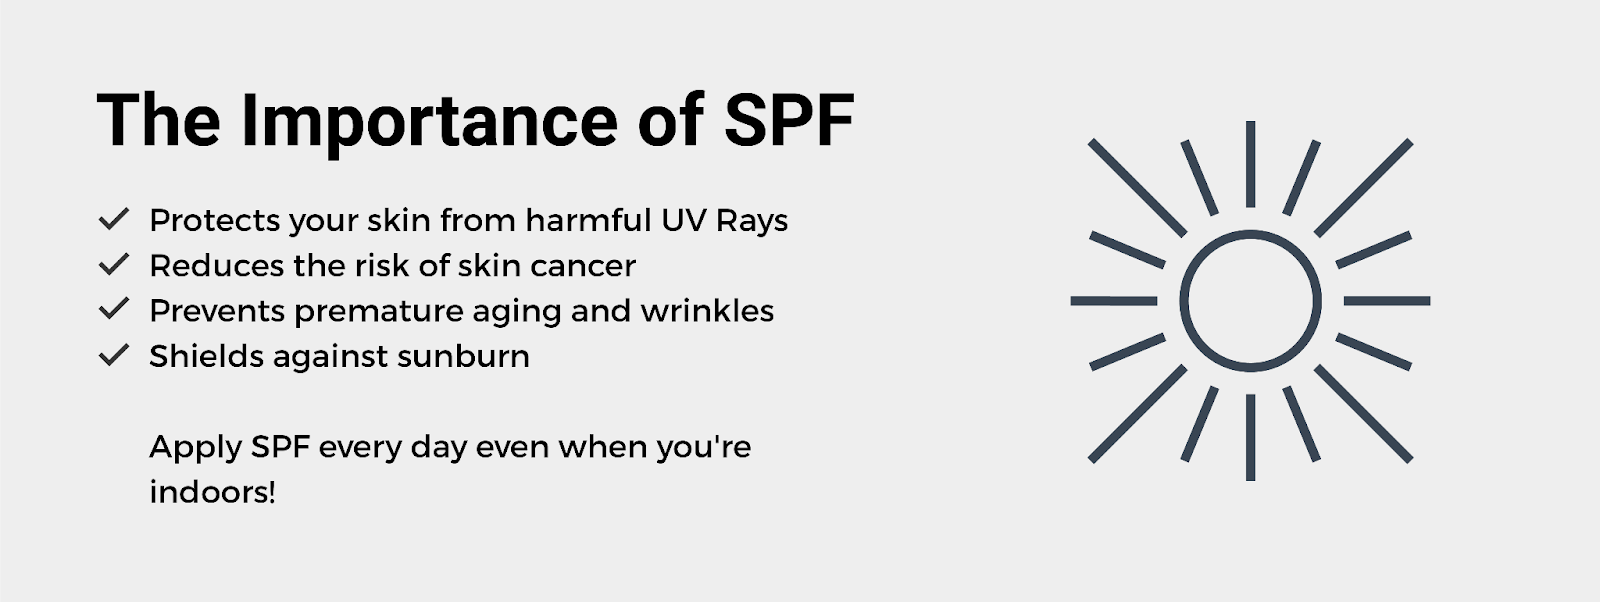 The importance of SPF